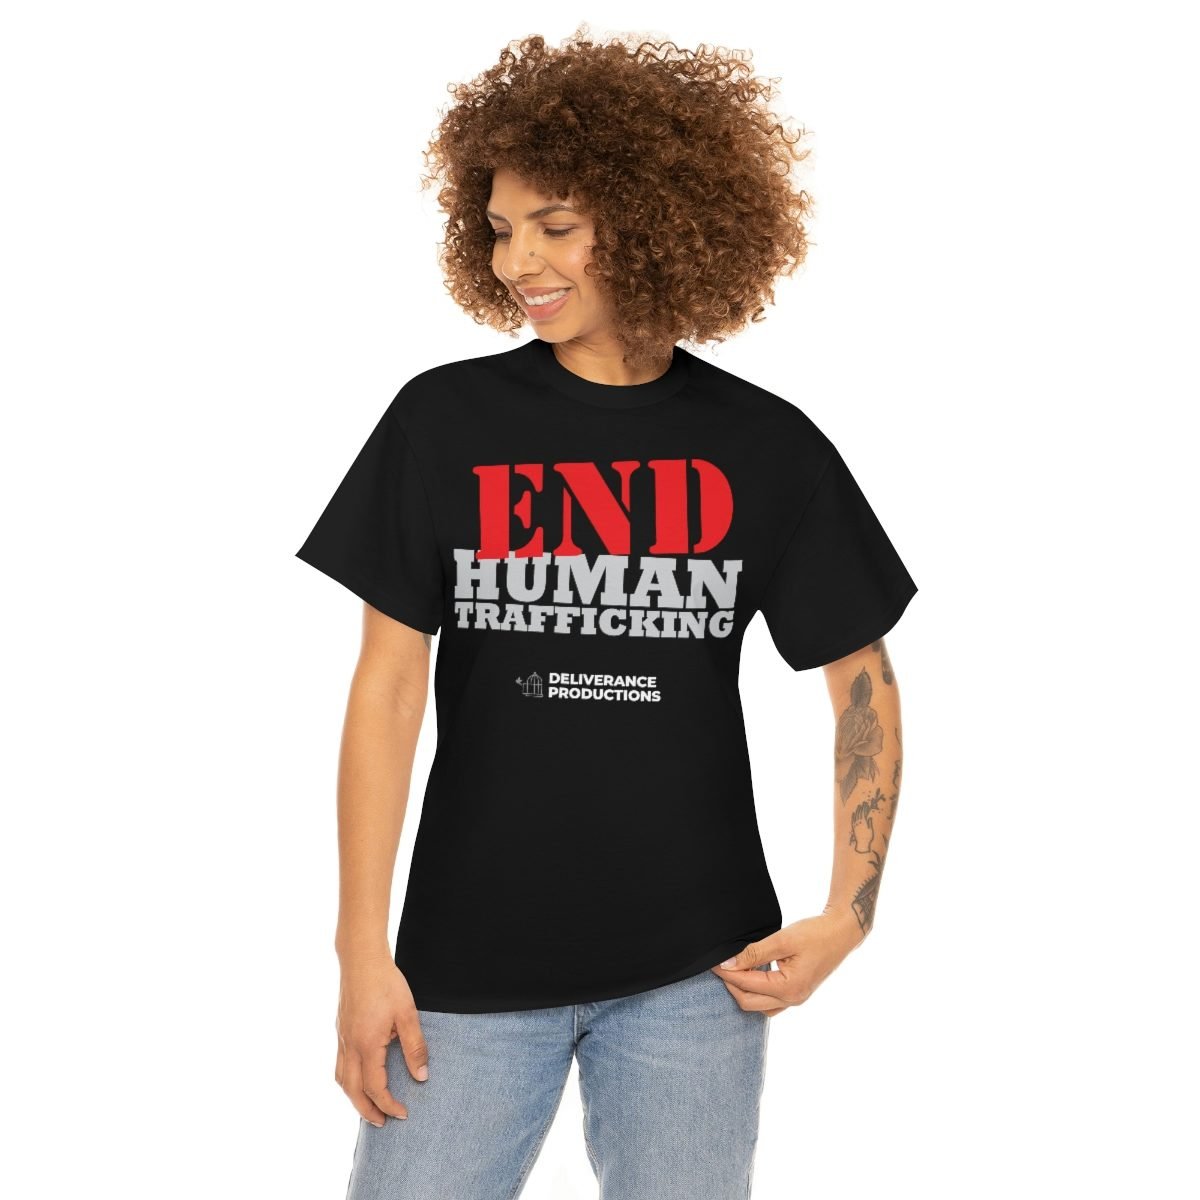 Deliverance Productions – End Human Trafficking Short Sleeve Tshirt